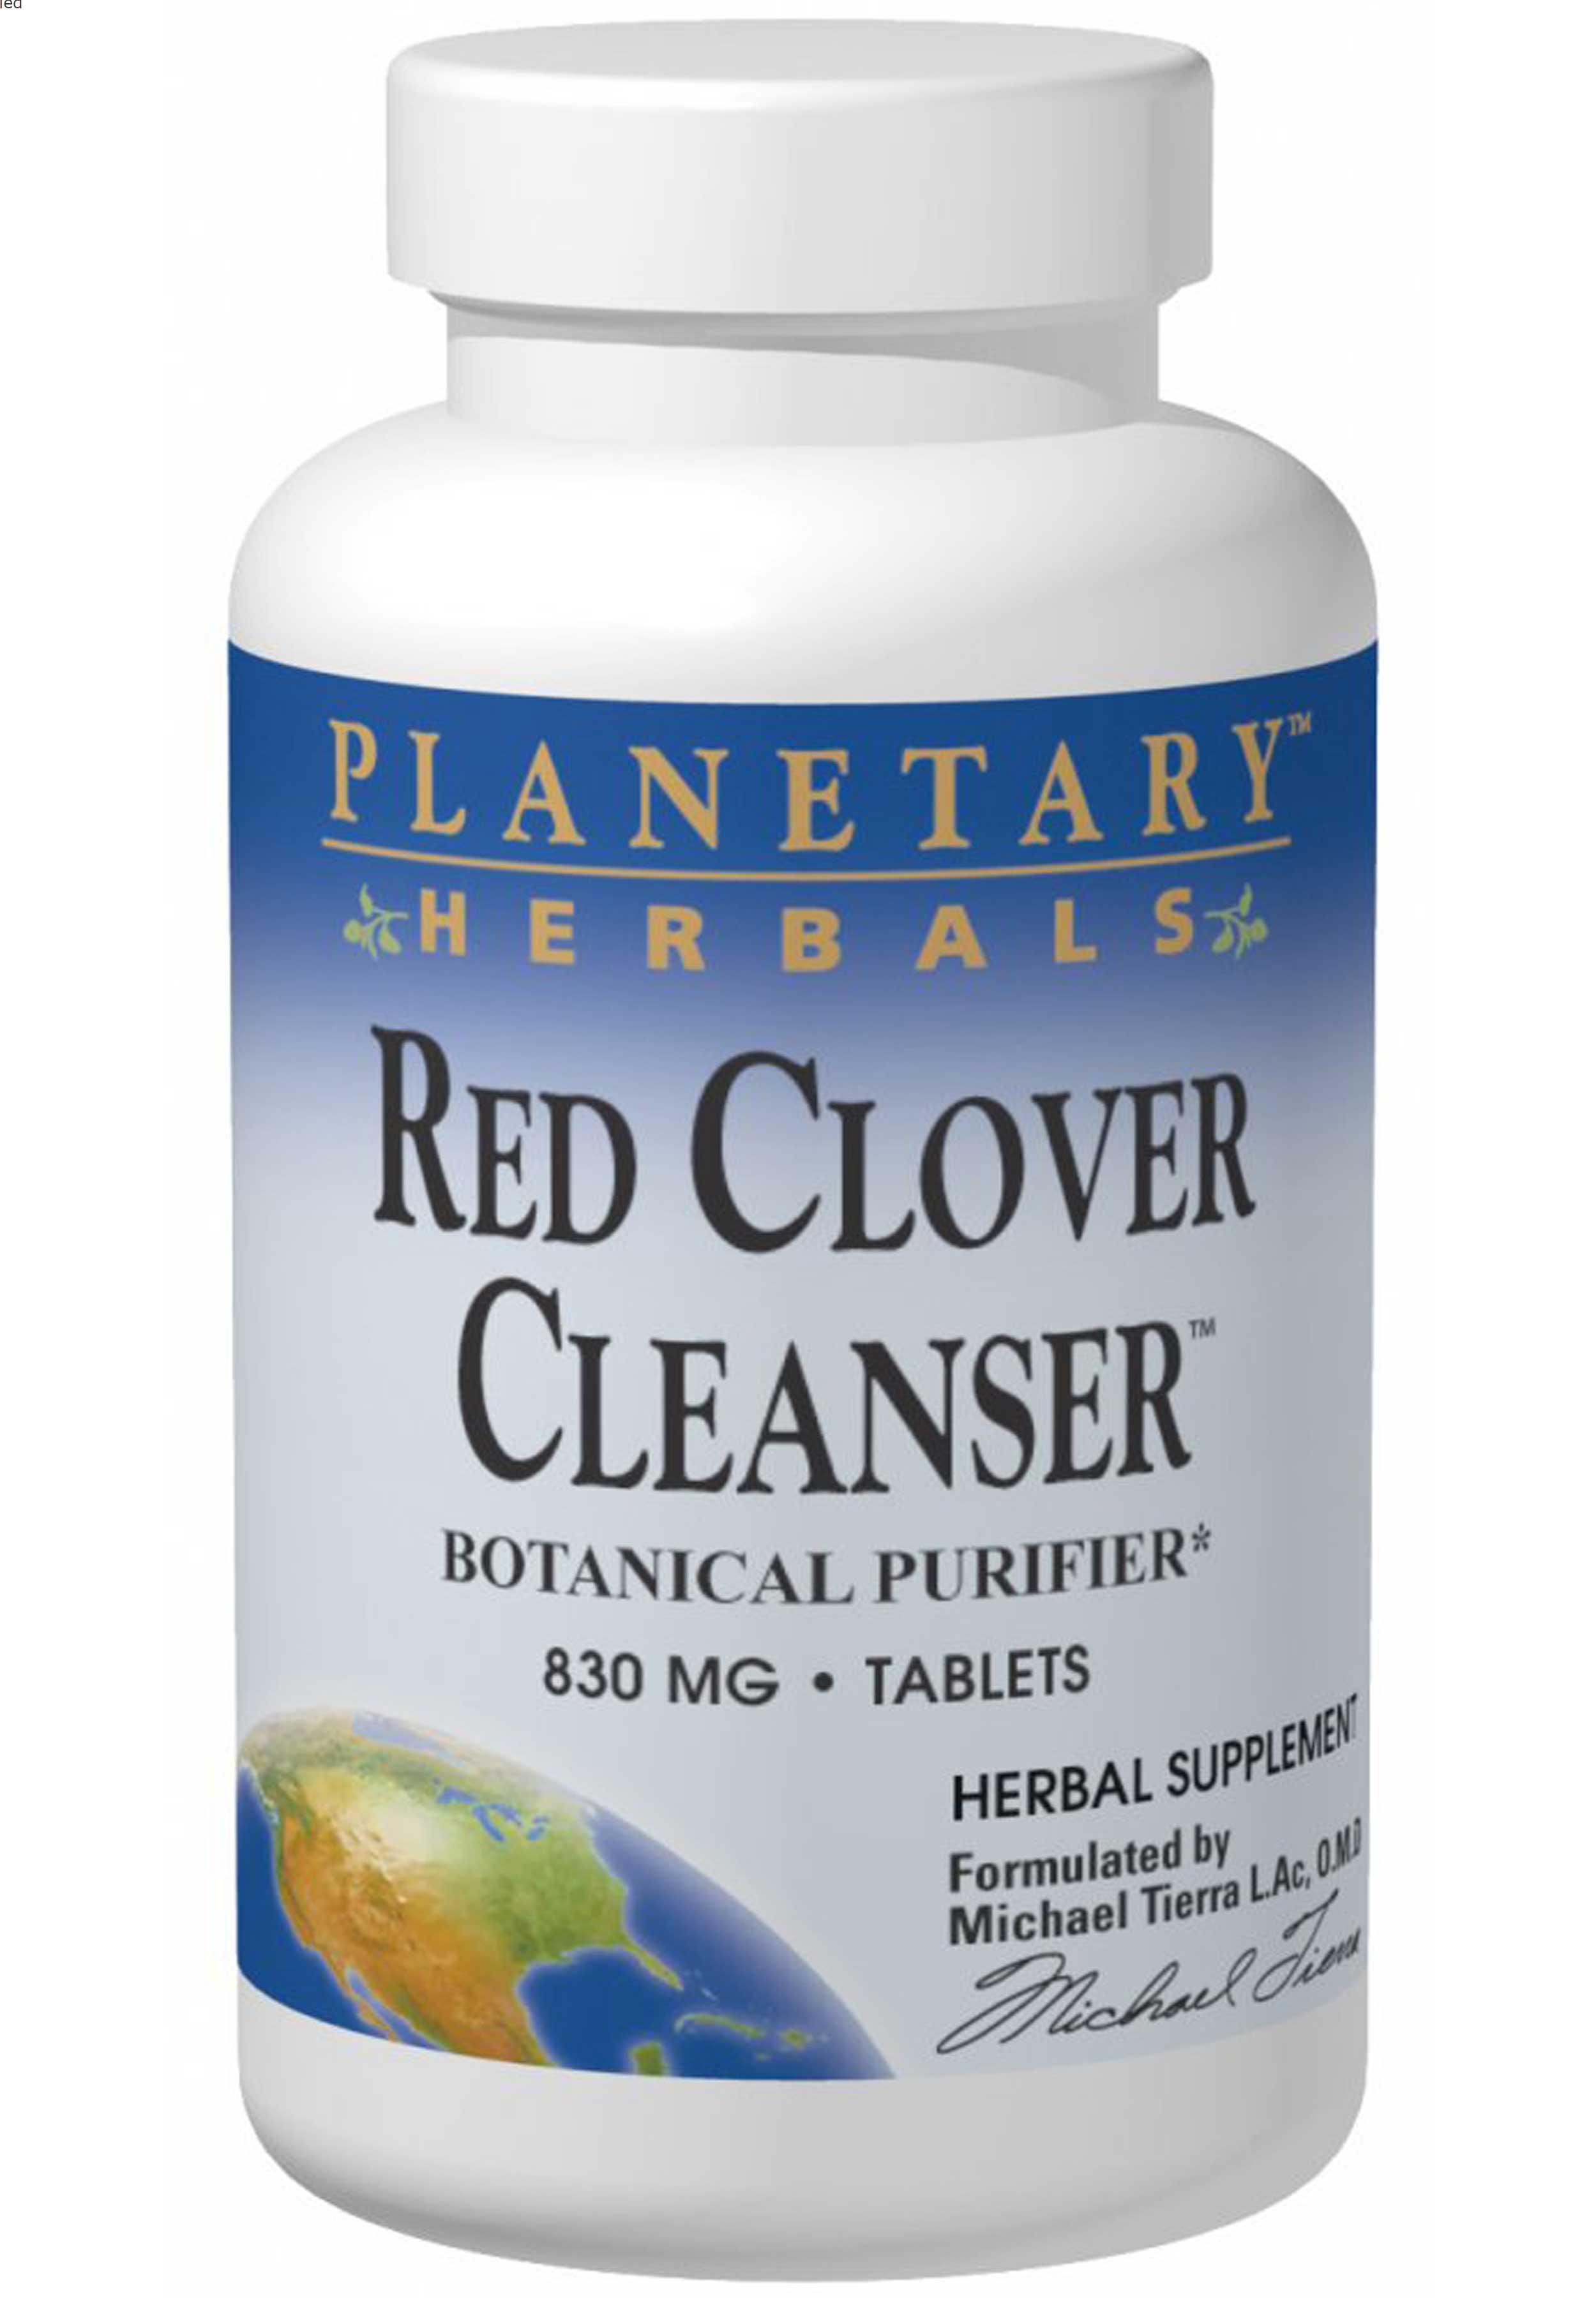 Planetary Herbals Red Clover Cleanser™